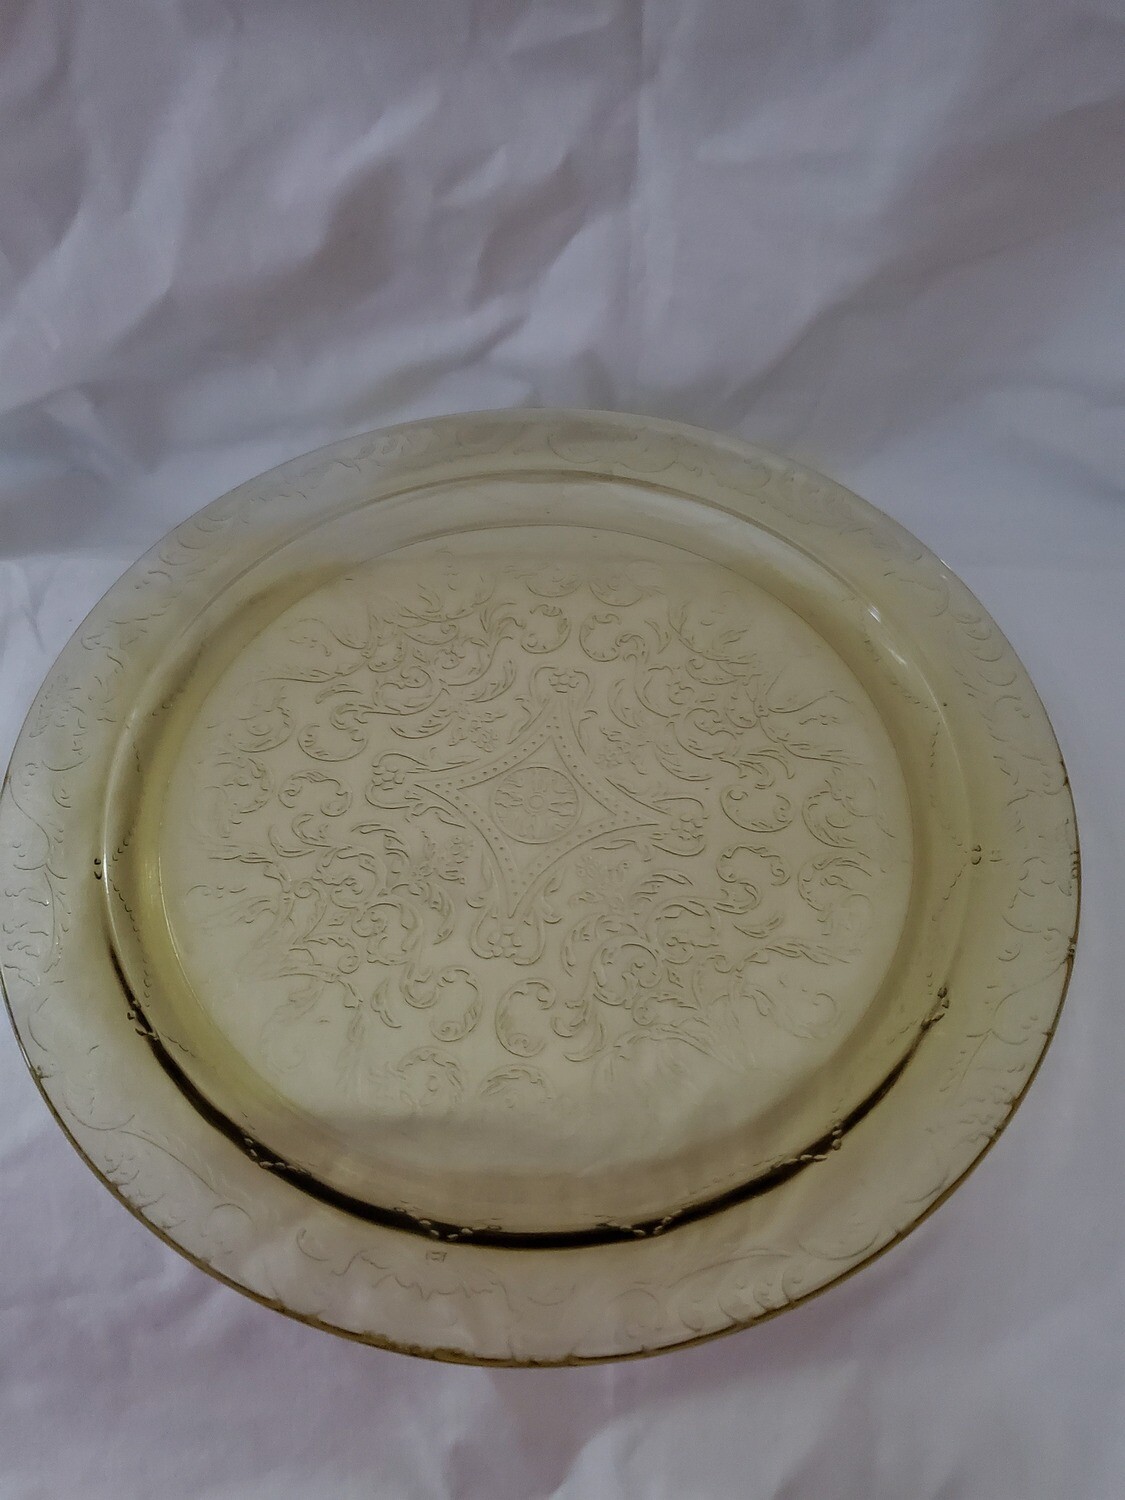 Vintage, Cake Plate 11 1/2"", Madrid Amber Depression Glass by Federal Glass